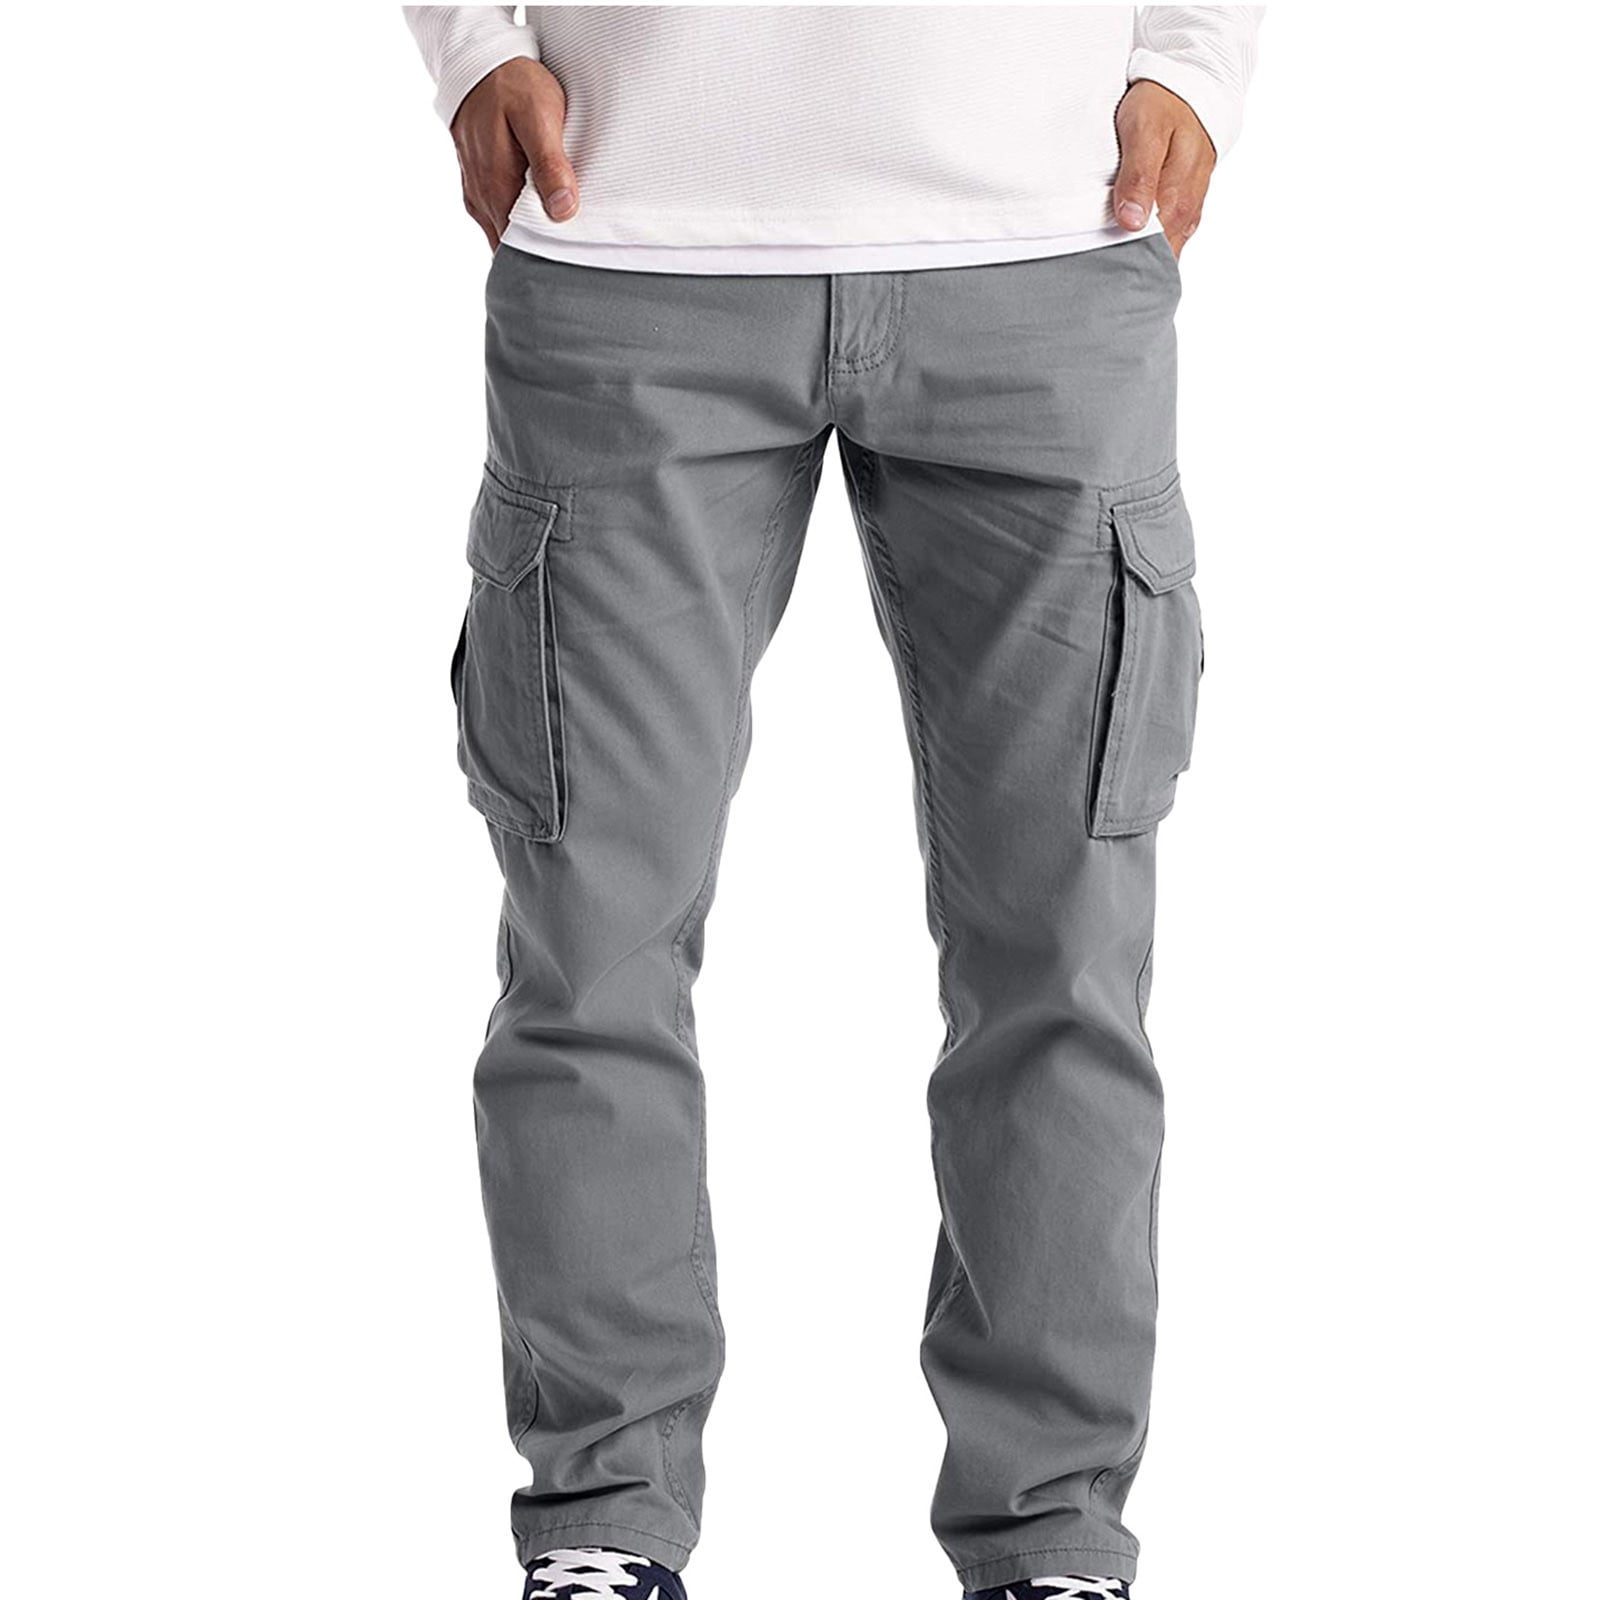 Zodggu Mens Cargo Pants Elastic Waist Solid Color Comfy Lounge Casual  Fashion Cozy Daily Trousers Soft Multiple Pockets Outdoor Straight Type  Fitness Full Length Pants Male Gray 14 